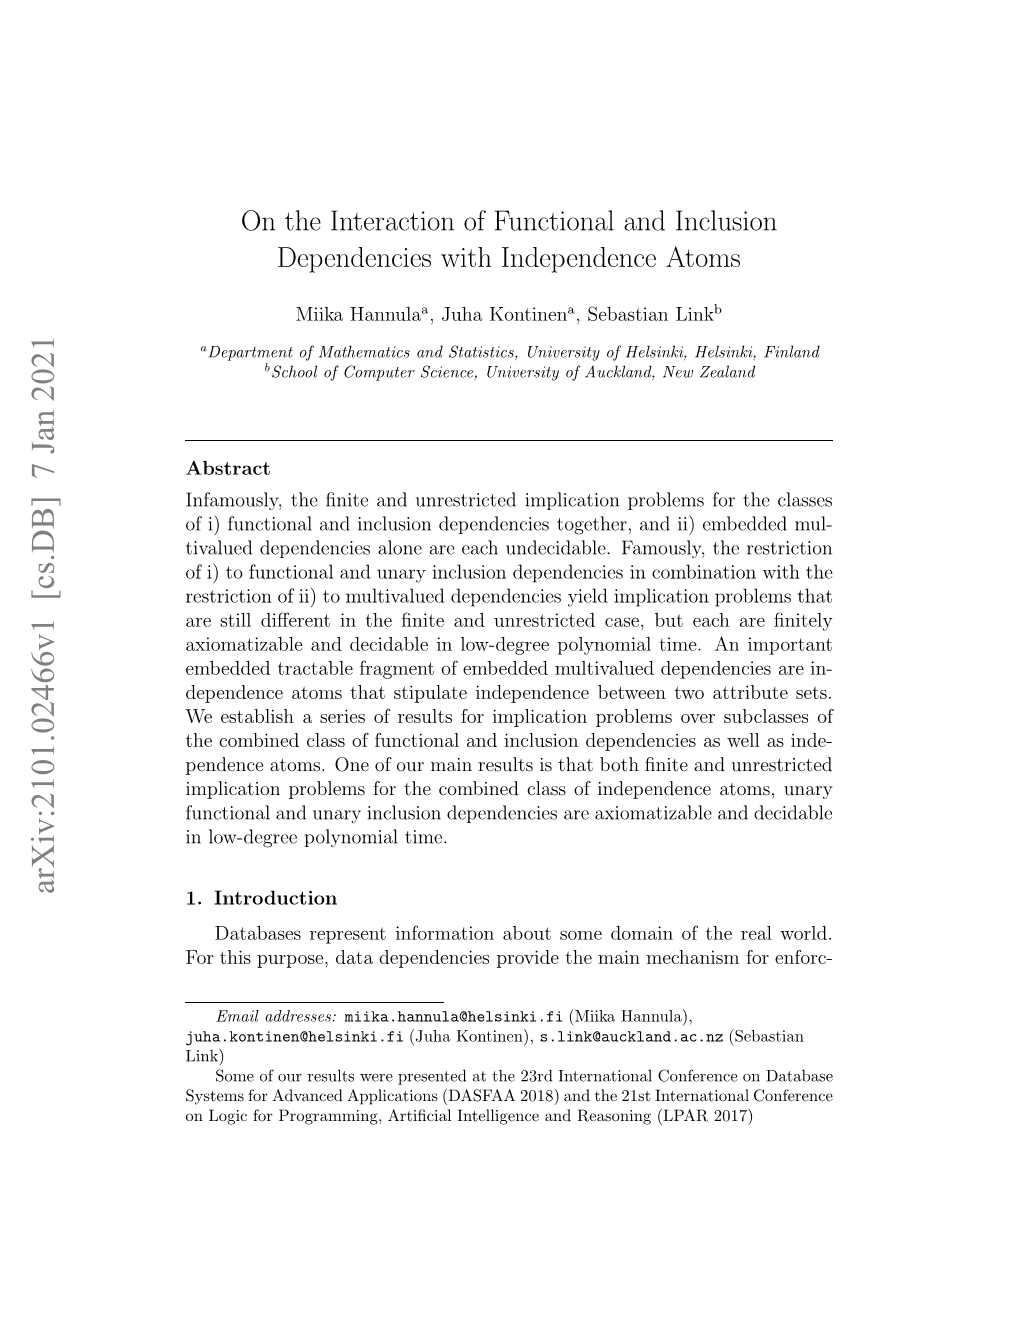 On the Interaction of Functional and Inclusion Dependencies With